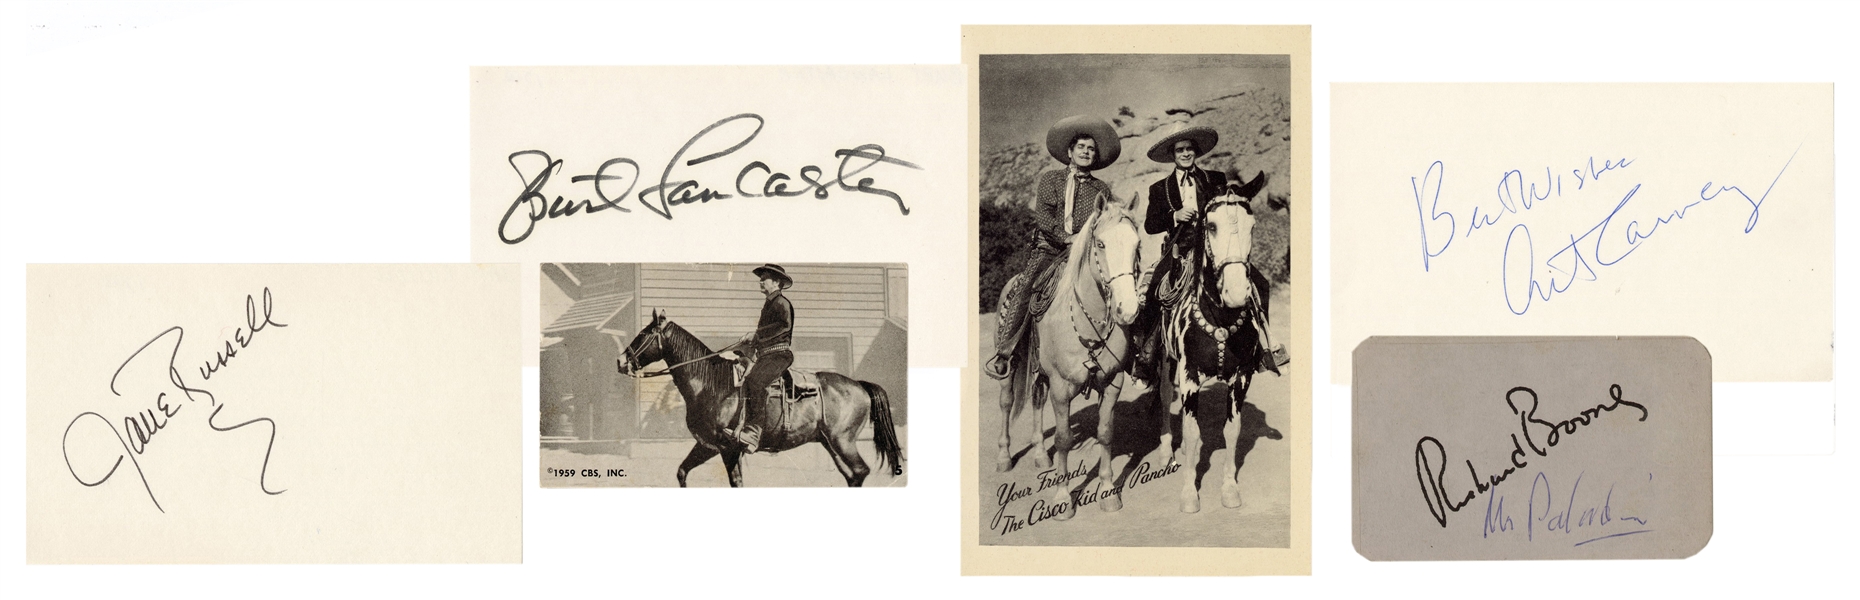  [THE CISCO KID]. A group of cards and television memorabili...